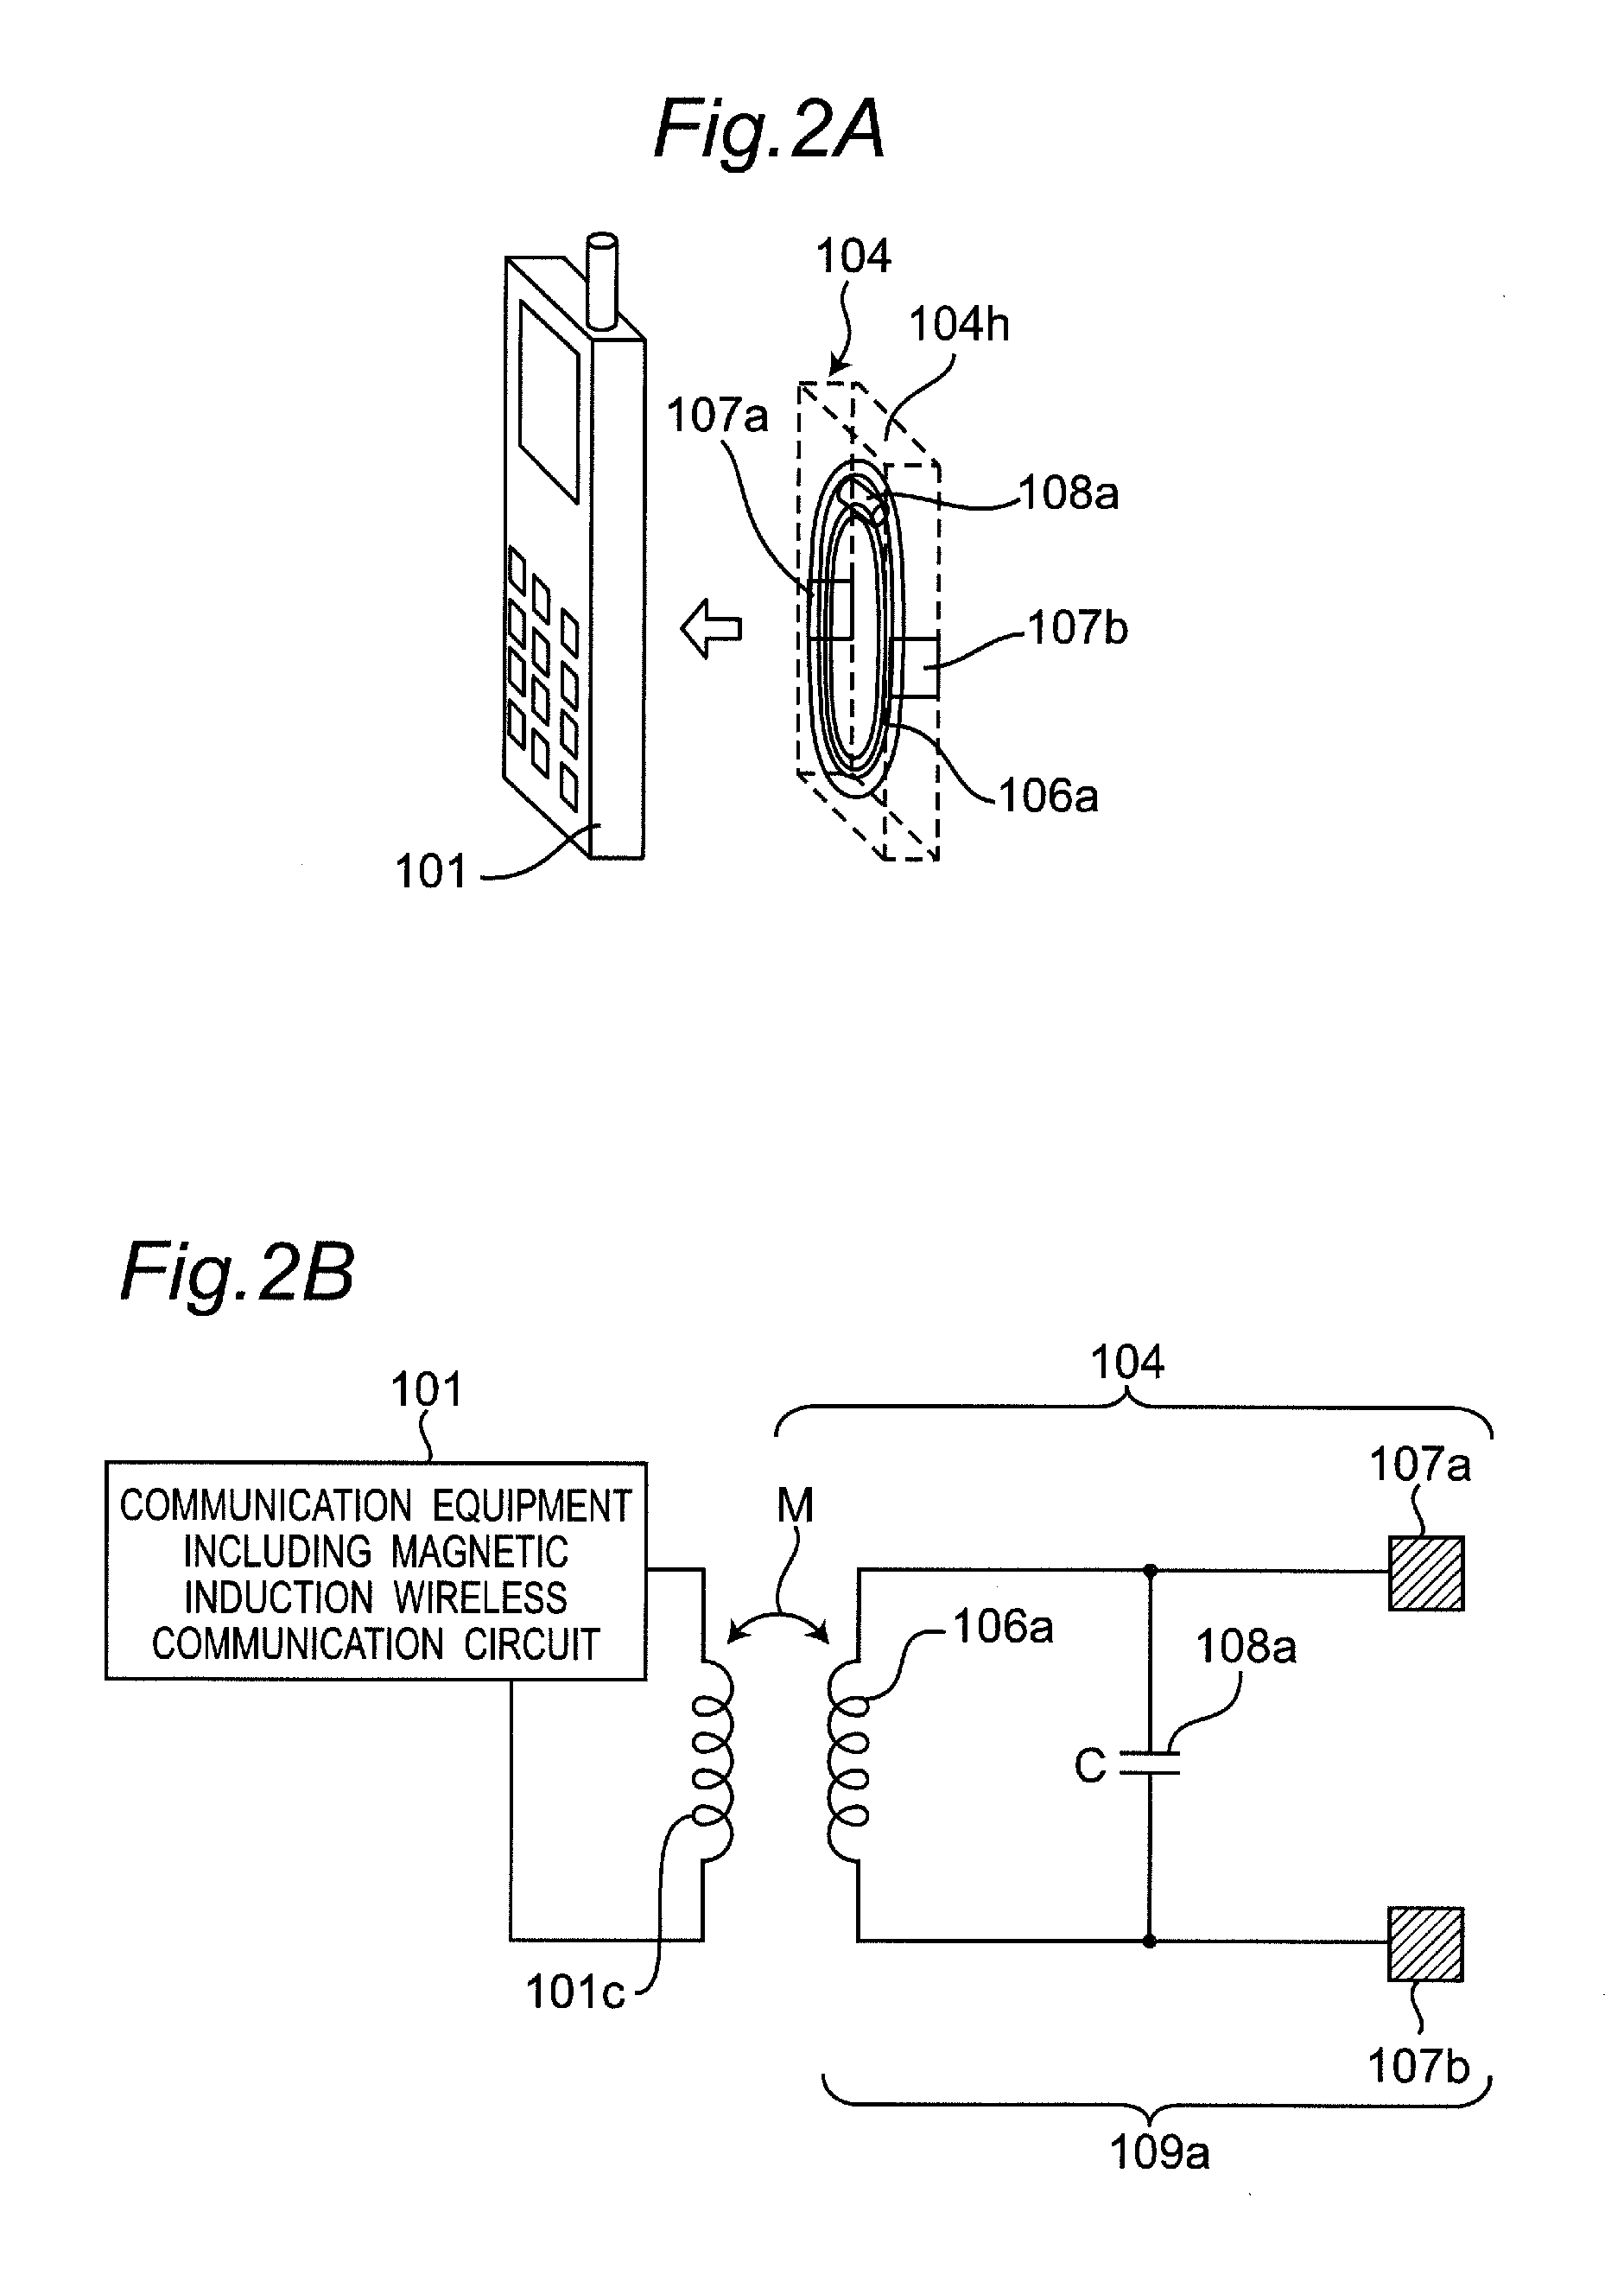 Intra-body communication apparatus provided with magnetic induction wireless communication circuit performing wireless communications using magnetic induction